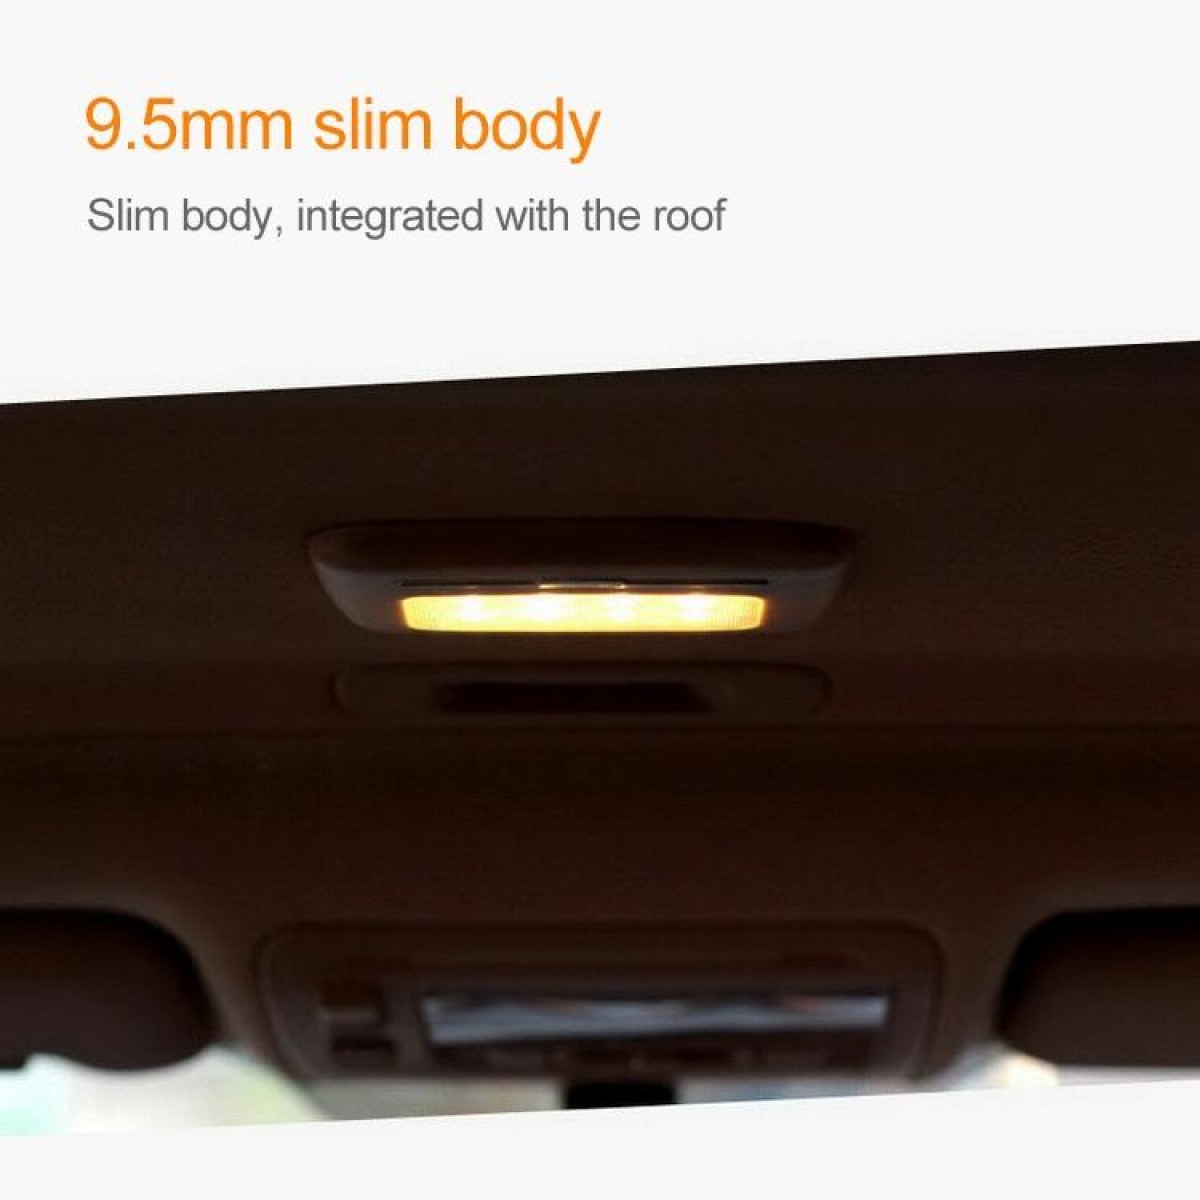 Car Interior Wireless Intelligent Electronic Products Car Reading Lighting Ceiling Lamp LED Night Light, Light Color:Yellow Light(White)